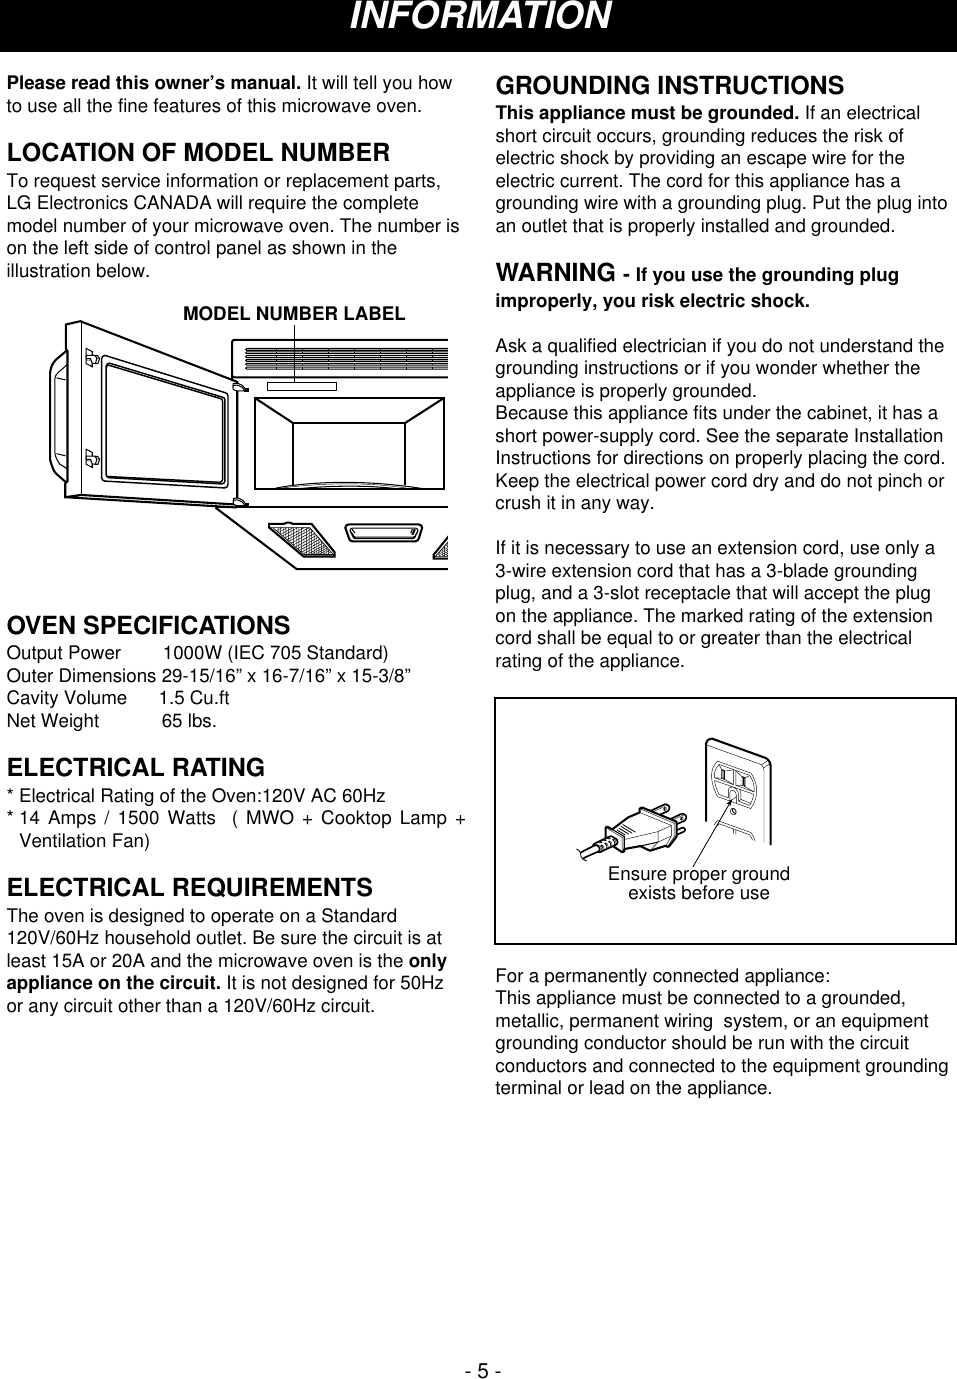 - 5 -Please read this owner’s manual. It will tell you howto use all the fine features of this microwave oven. LOCATION OF MODEL NUMBERTo request service information or replacement parts,LG Electronics CANADA will require the completemodel number of your microwave oven. The number ison the left side of control panel as shown in theillustration below.OVEN SPECIFICATIONSOutput Power        1000W (IEC 705 Standard)Outer Dimensions 29-15/16” x 16-7/16” x 15-3/8”Cavity Volume      1.5 Cu.ftNet Weight            65 lbs.ELECTRICAL RATING* Electrical Rating of the Oven:120V AC 60Hz* 14 Amps / 1500 Watts  ( MWO + Cooktop Lamp +Ventilation Fan)ELECTRICAL REQUIREMENTSThe oven is designed to operate on a Standard120V/60Hz household outlet. Be sure the circuit is atleast 15A or 20A and the microwave oven is the onlyappliance on the circuit. It is not designed for 50Hzor any circuit other than a 120V/60Hz circuit.GROUNDING INSTRUCTIONSThis appliance must be grounded. If an electricalshort circuit occurs, grounding reduces the risk ofelectric shock by providing an escape wire for theelectric current. The cord for this appliance has agrounding wire with a grounding plug. Put the plug intoan outlet that is properly installed and grounded.WARNING - If you use the grounding plugimproperly, you risk electric shock.Ask a qualified electrician if you do not understand thegrounding instructions or if you wonder whether theappliance is properly grounded.Because this appliance fits under the cabinet, it has ashort power-supply cord. See the separate InstallationInstructions for directions on properly placing the cord.Keep the electrical power cord dry and do not pinch orcrush it in any way.If it is necessary to use an extension cord, use only a3-wire extension cord that has a 3-blade groundingplug, and a 3-slot receptacle that will accept the plugon the appliance. The marked rating of the extensioncord shall be equal to or greater than the electricalrating of the appliance.For a permanently connected appliance:This appliance must be connected to a grounded,metallic, permanent wiring  system, or an equipmentgrounding conductor should be run with the circuitconductors and connected to the equipment groundingterminal or lead on the appliance.Ensure proper groundexists before useMODEL NUMBER LABELINFORMATION